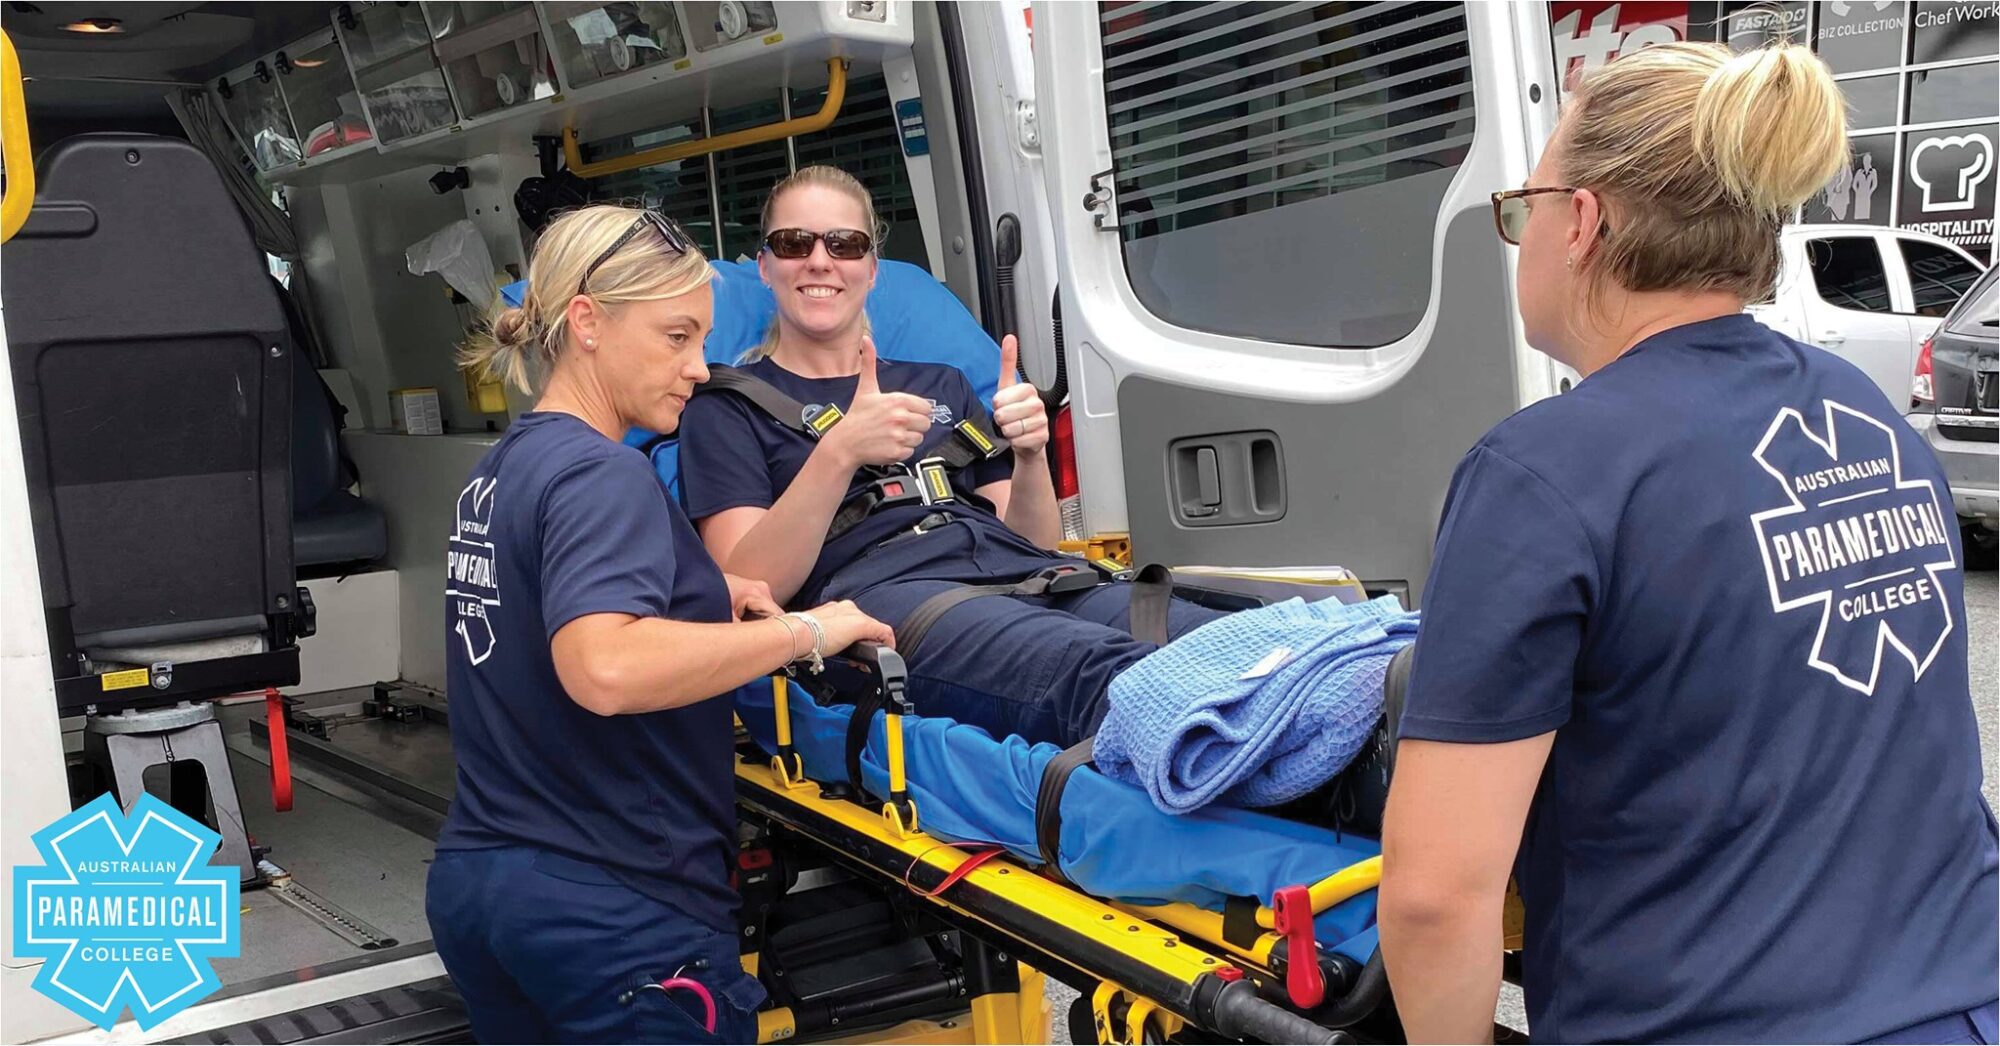 Nurse to Paramedic advice. Female paramedical students load patient into ambulance